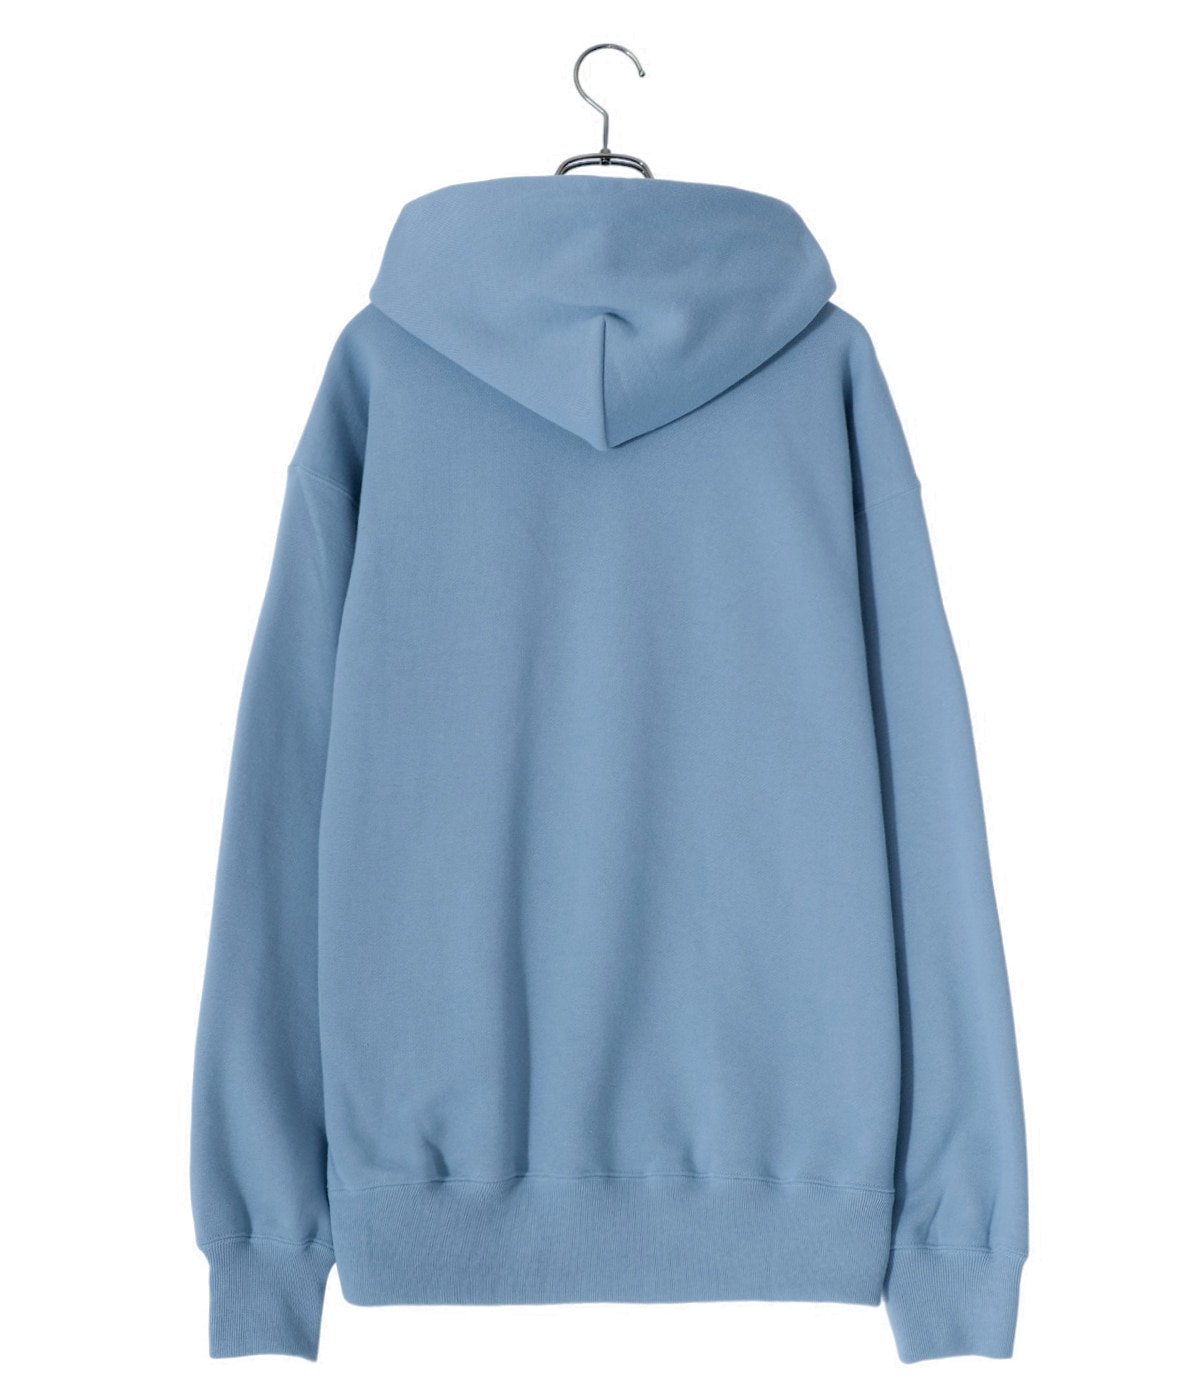 MIDDLE WEIGHT PULLOVER HOODED SWEAT SHIRT ( TYPE-1 ) | WACKO MARIA ...TENDE